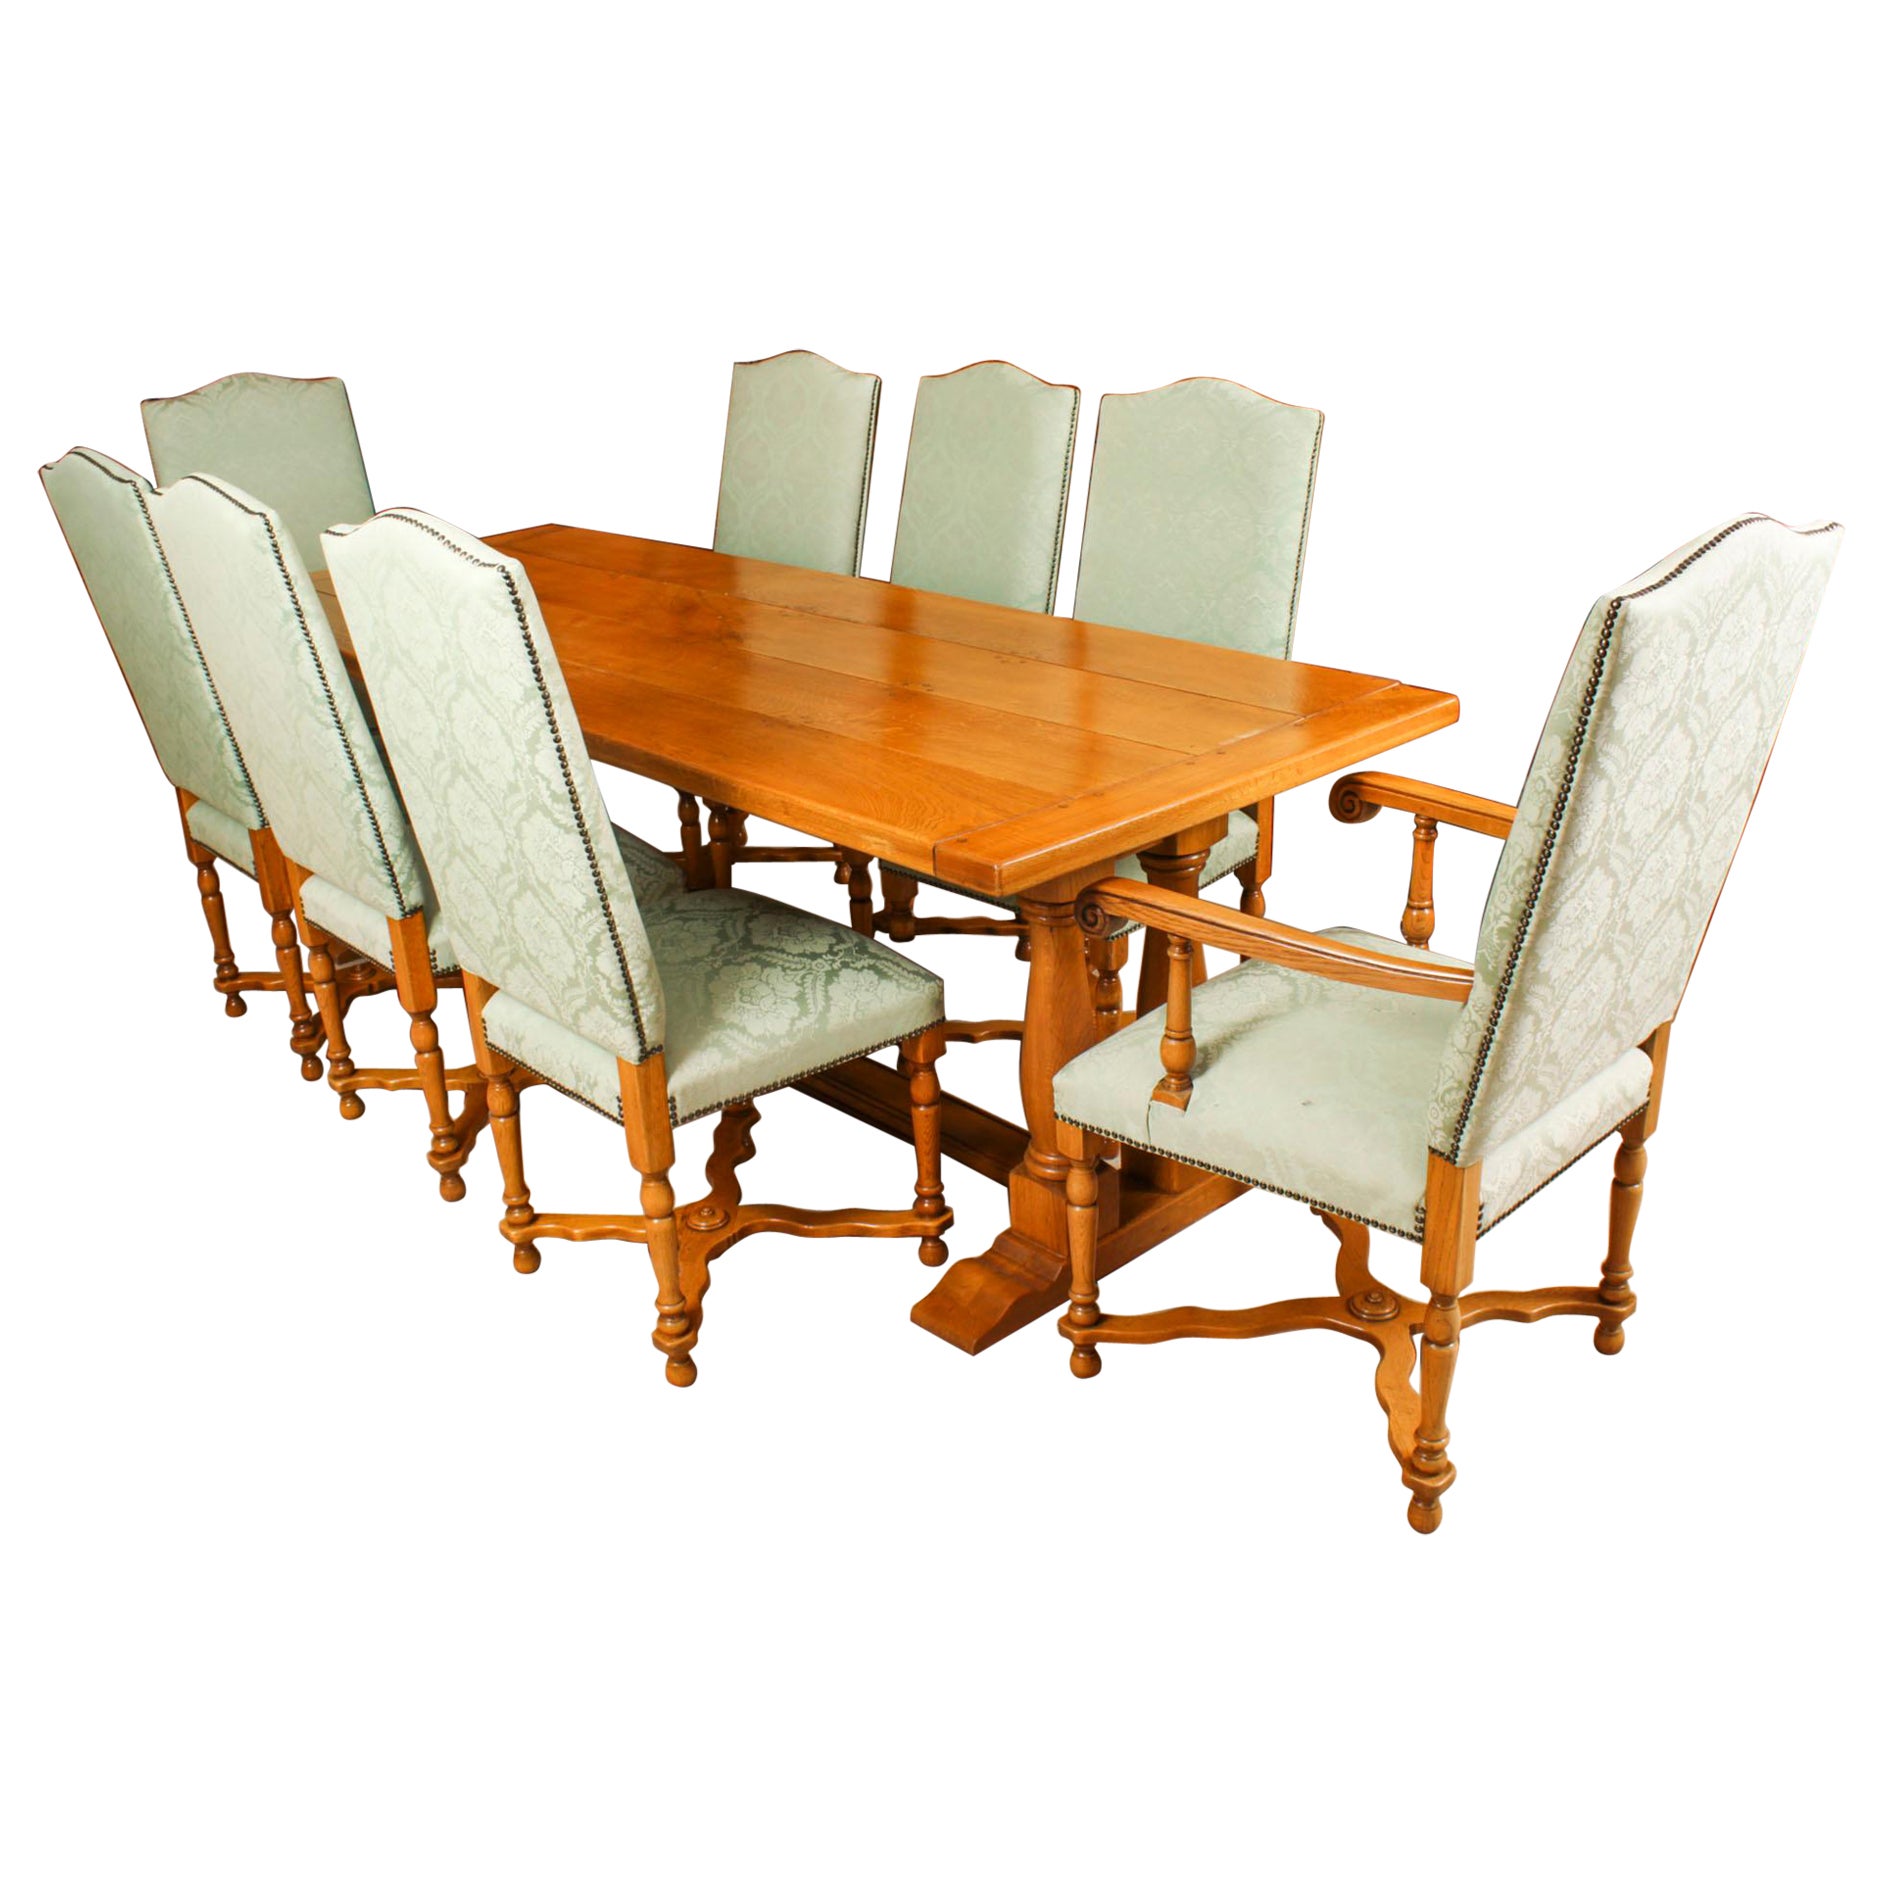 Vintage solid oak Refectory Dining Table, 8 Chairs and Sideboard Late 20th C